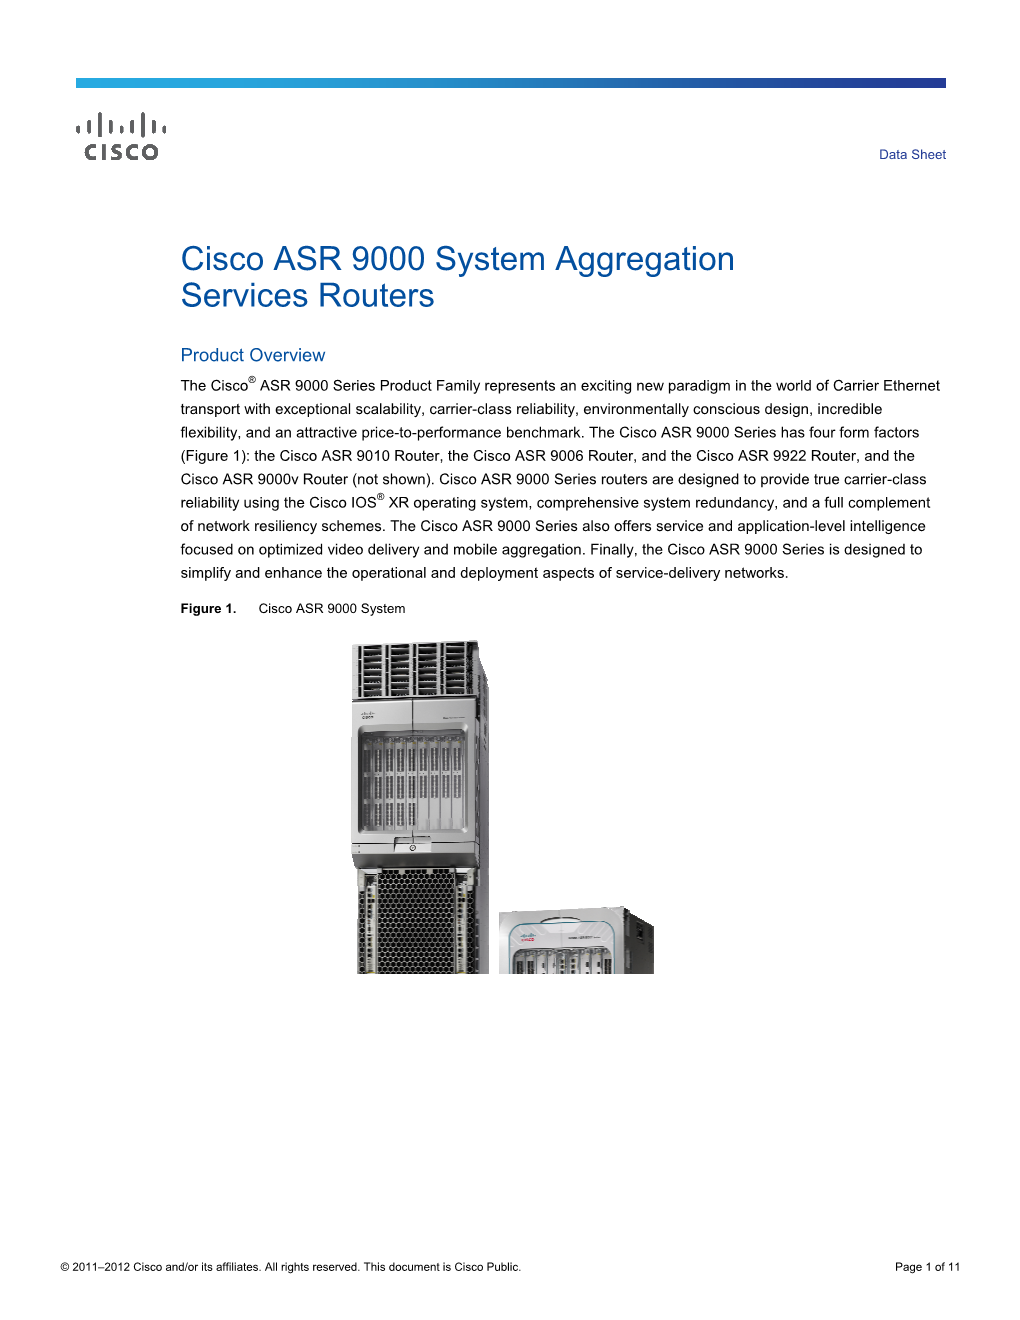 Cisco ASR 9000 System Aggregation Services Routers